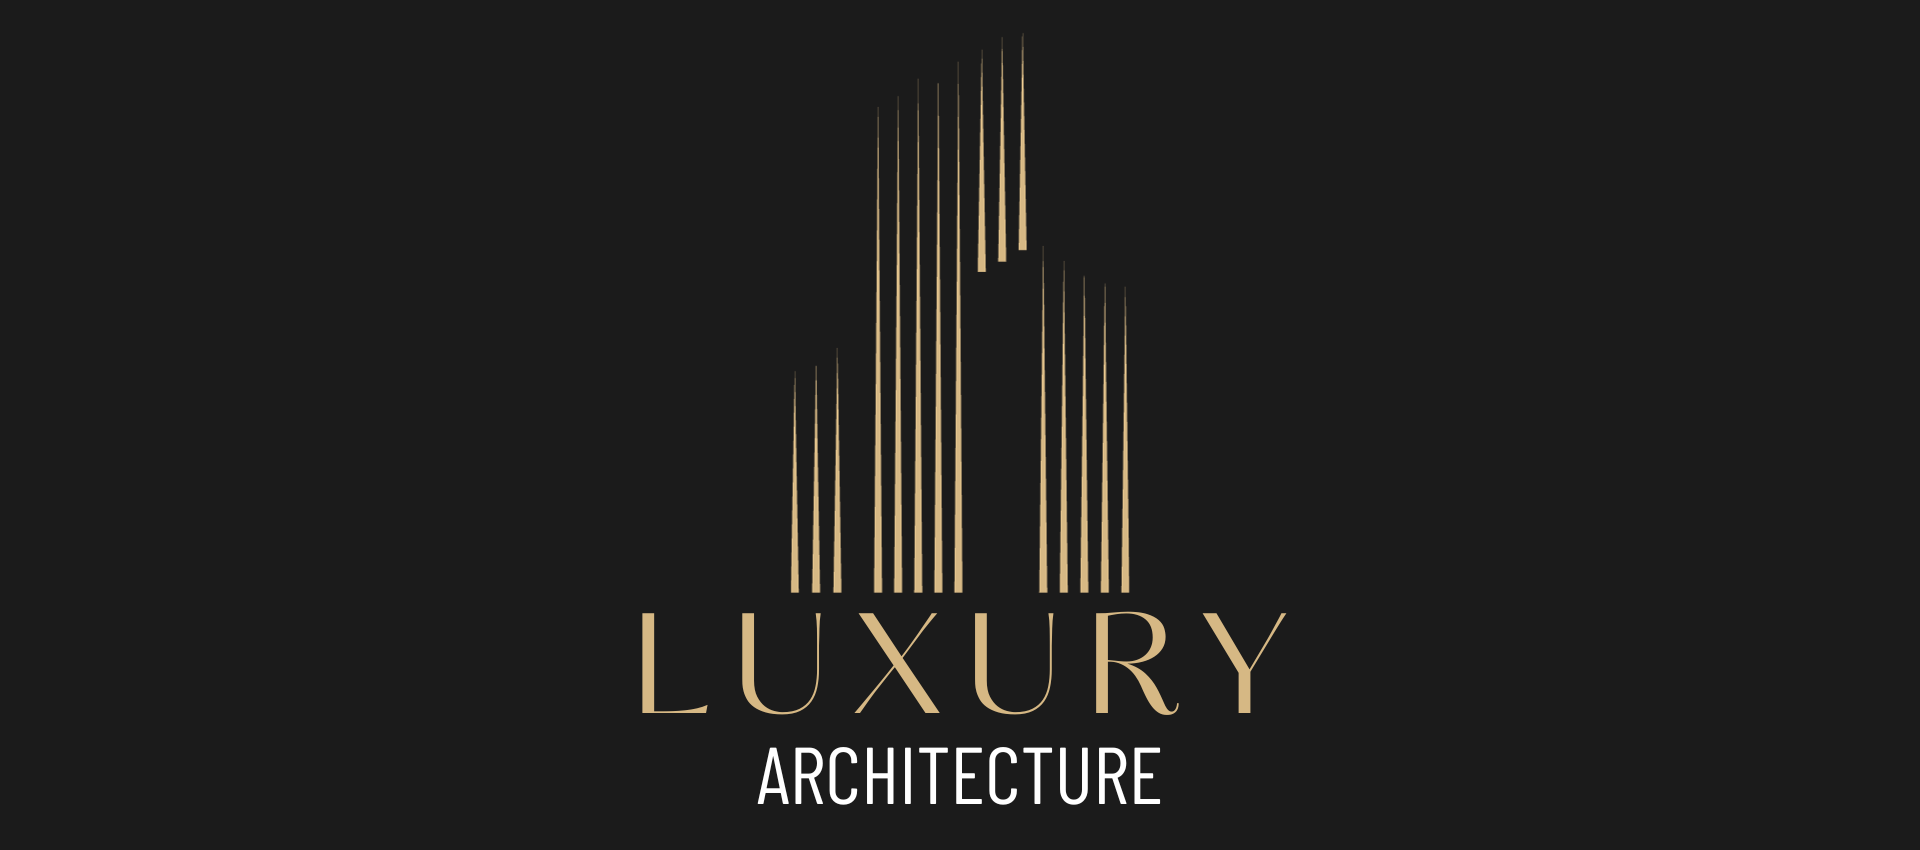 A black and gold logo for luxury architecture